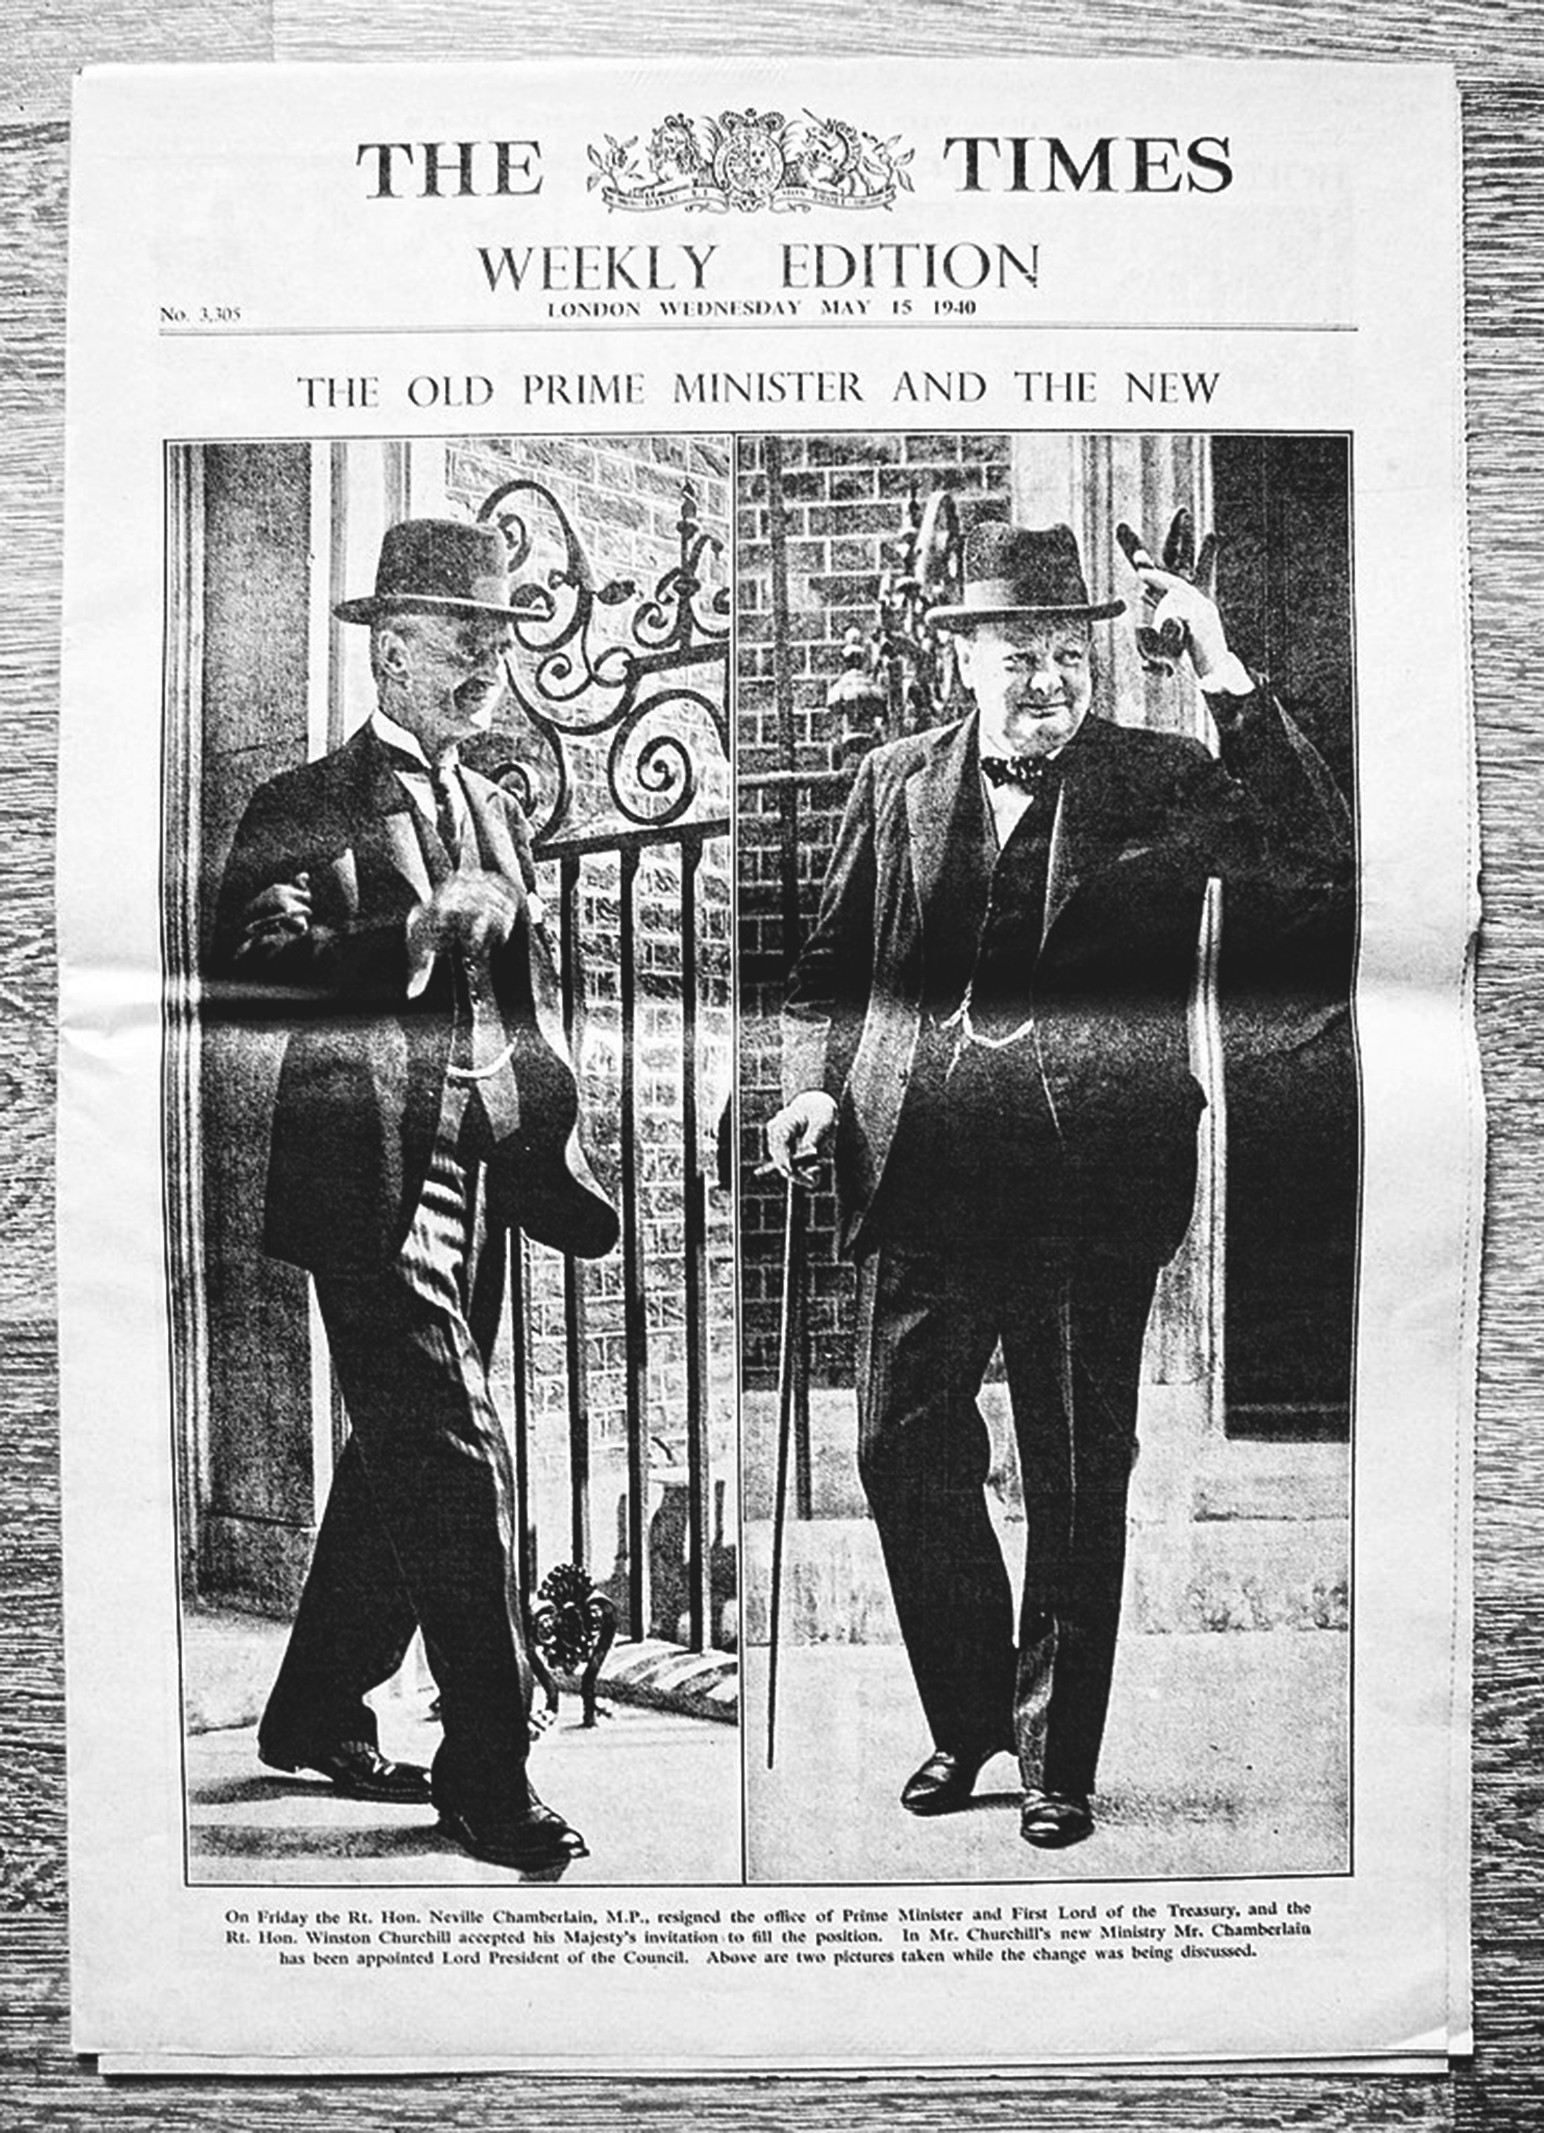 Frontpage_weekly_magazine_The_Times_May_15_1940_With_headline_The_Old_prime_minister_and_the_new